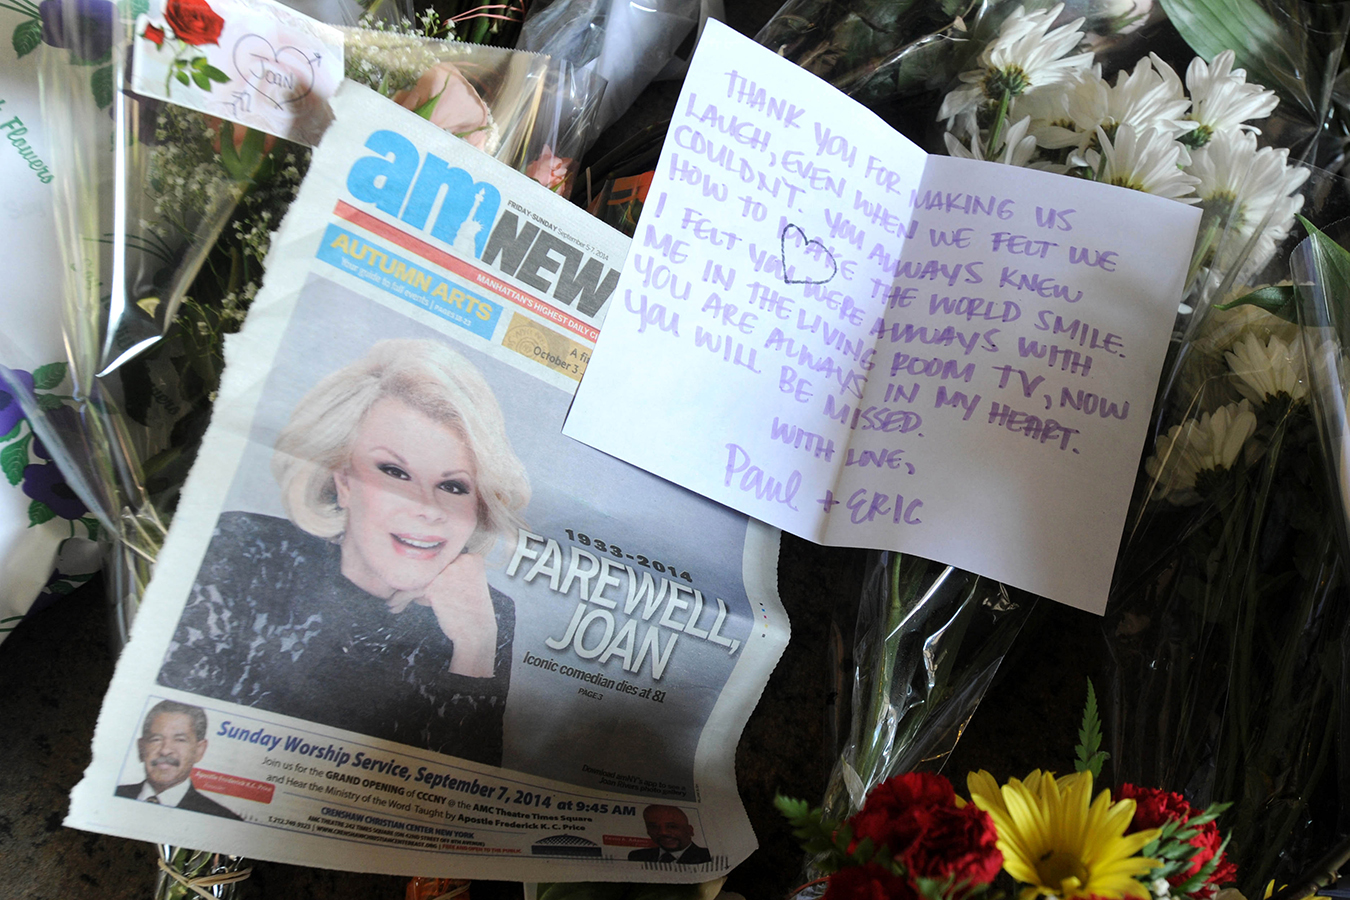 comedian Joan Rivers — who passed away in 2014 following a routine procedure at a Manhattan surgery center